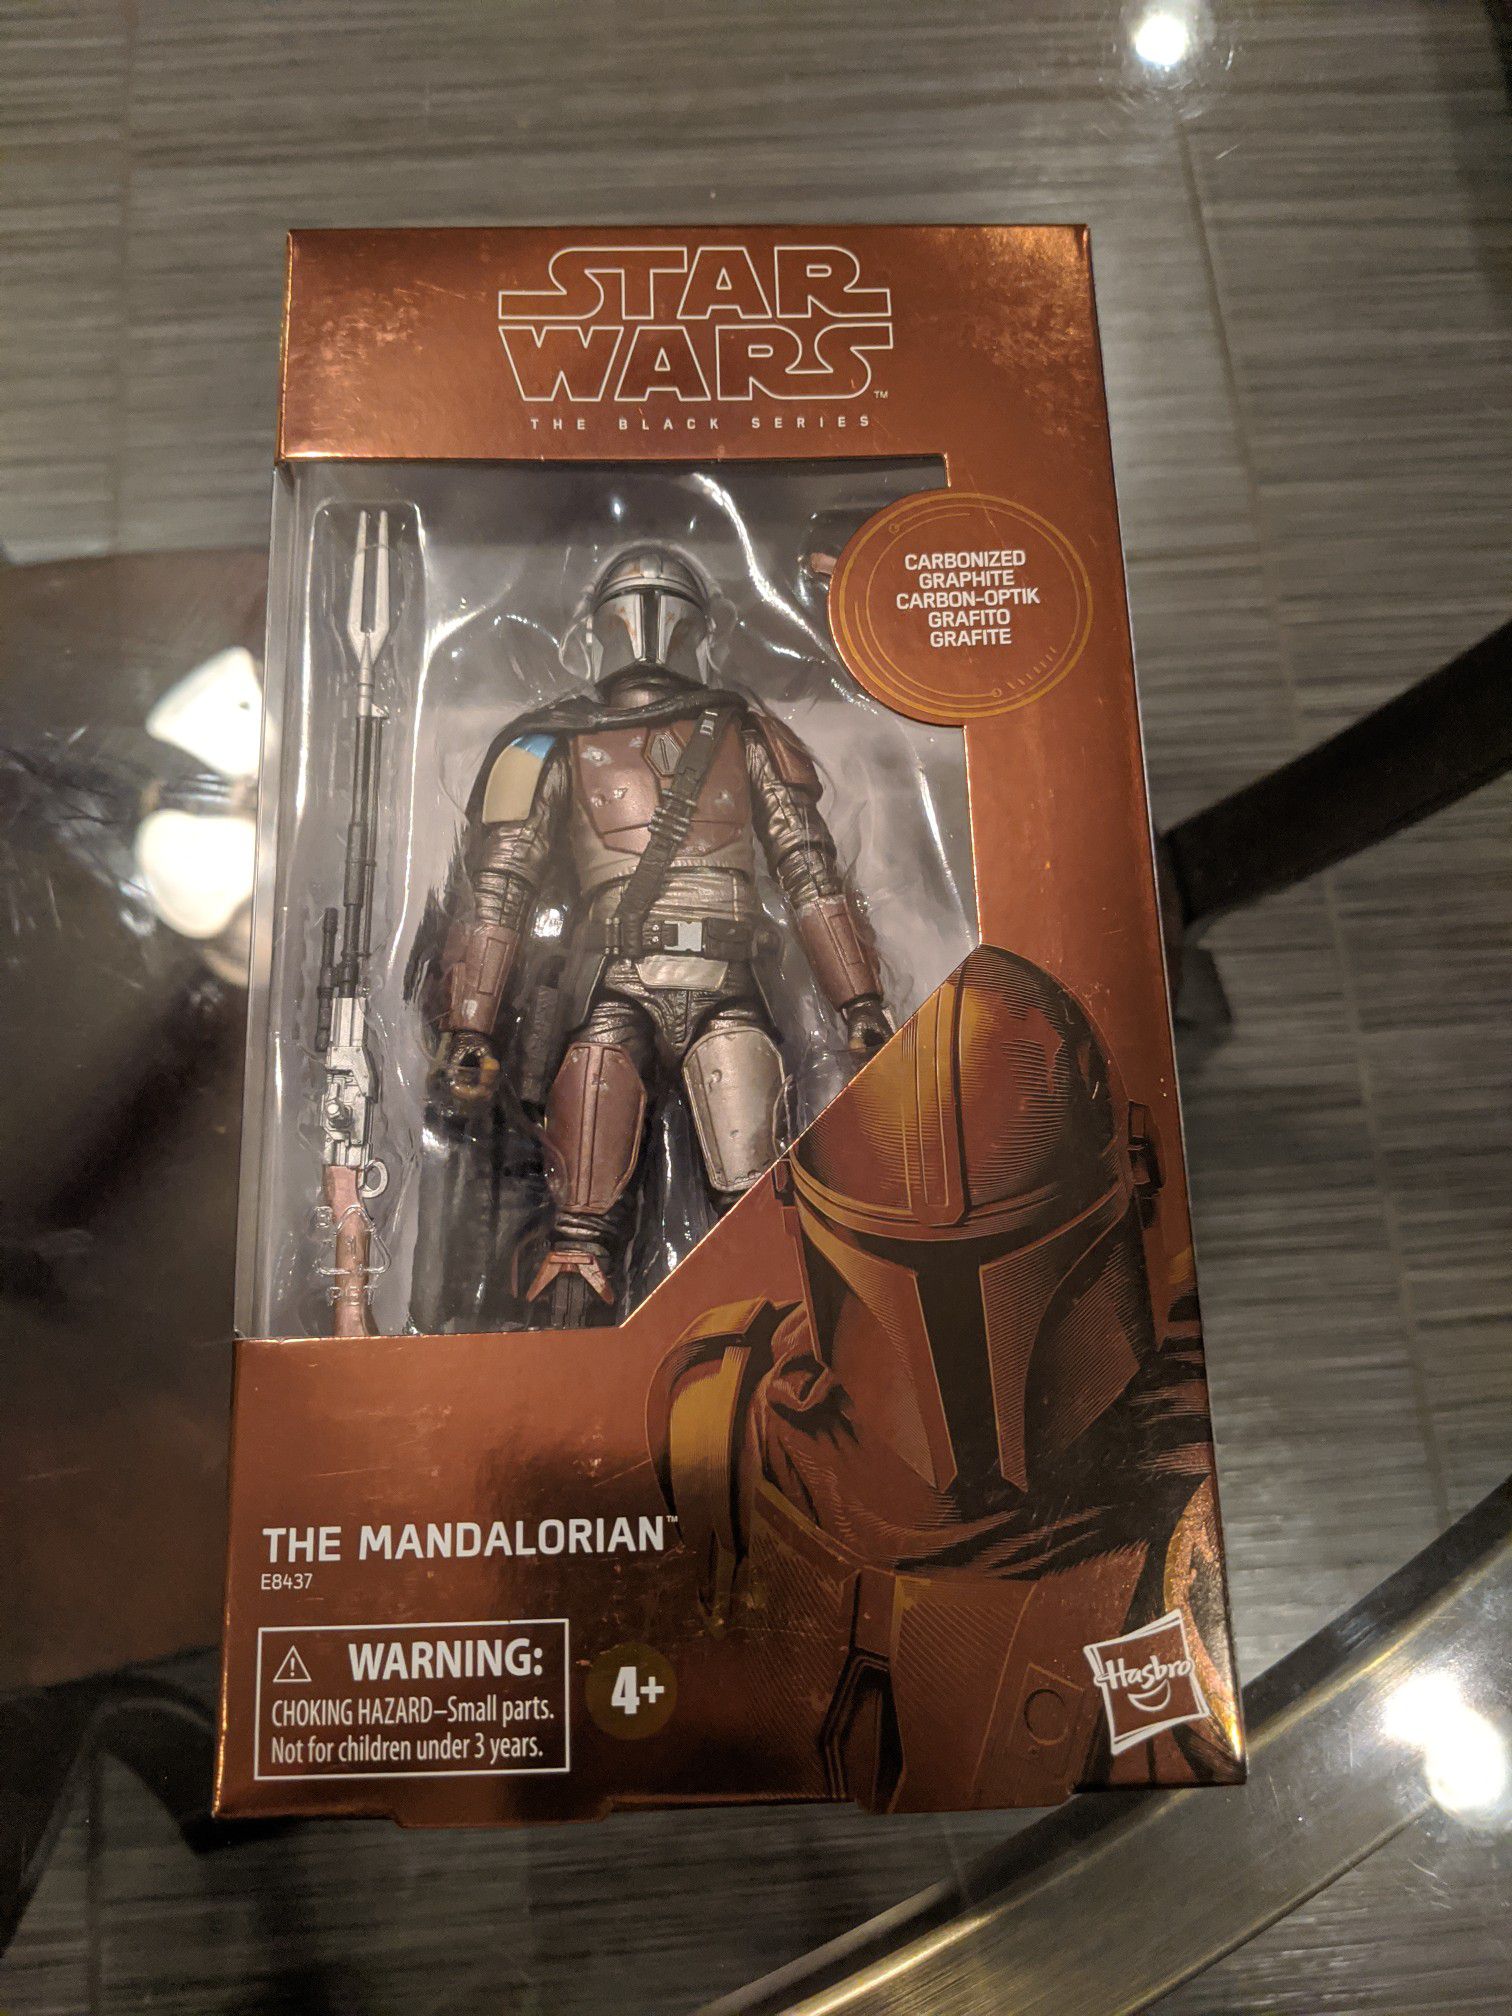 Star Wars The Black Series Carbonized Collection The Mandalorian Toy Figure (Target Exclusive)